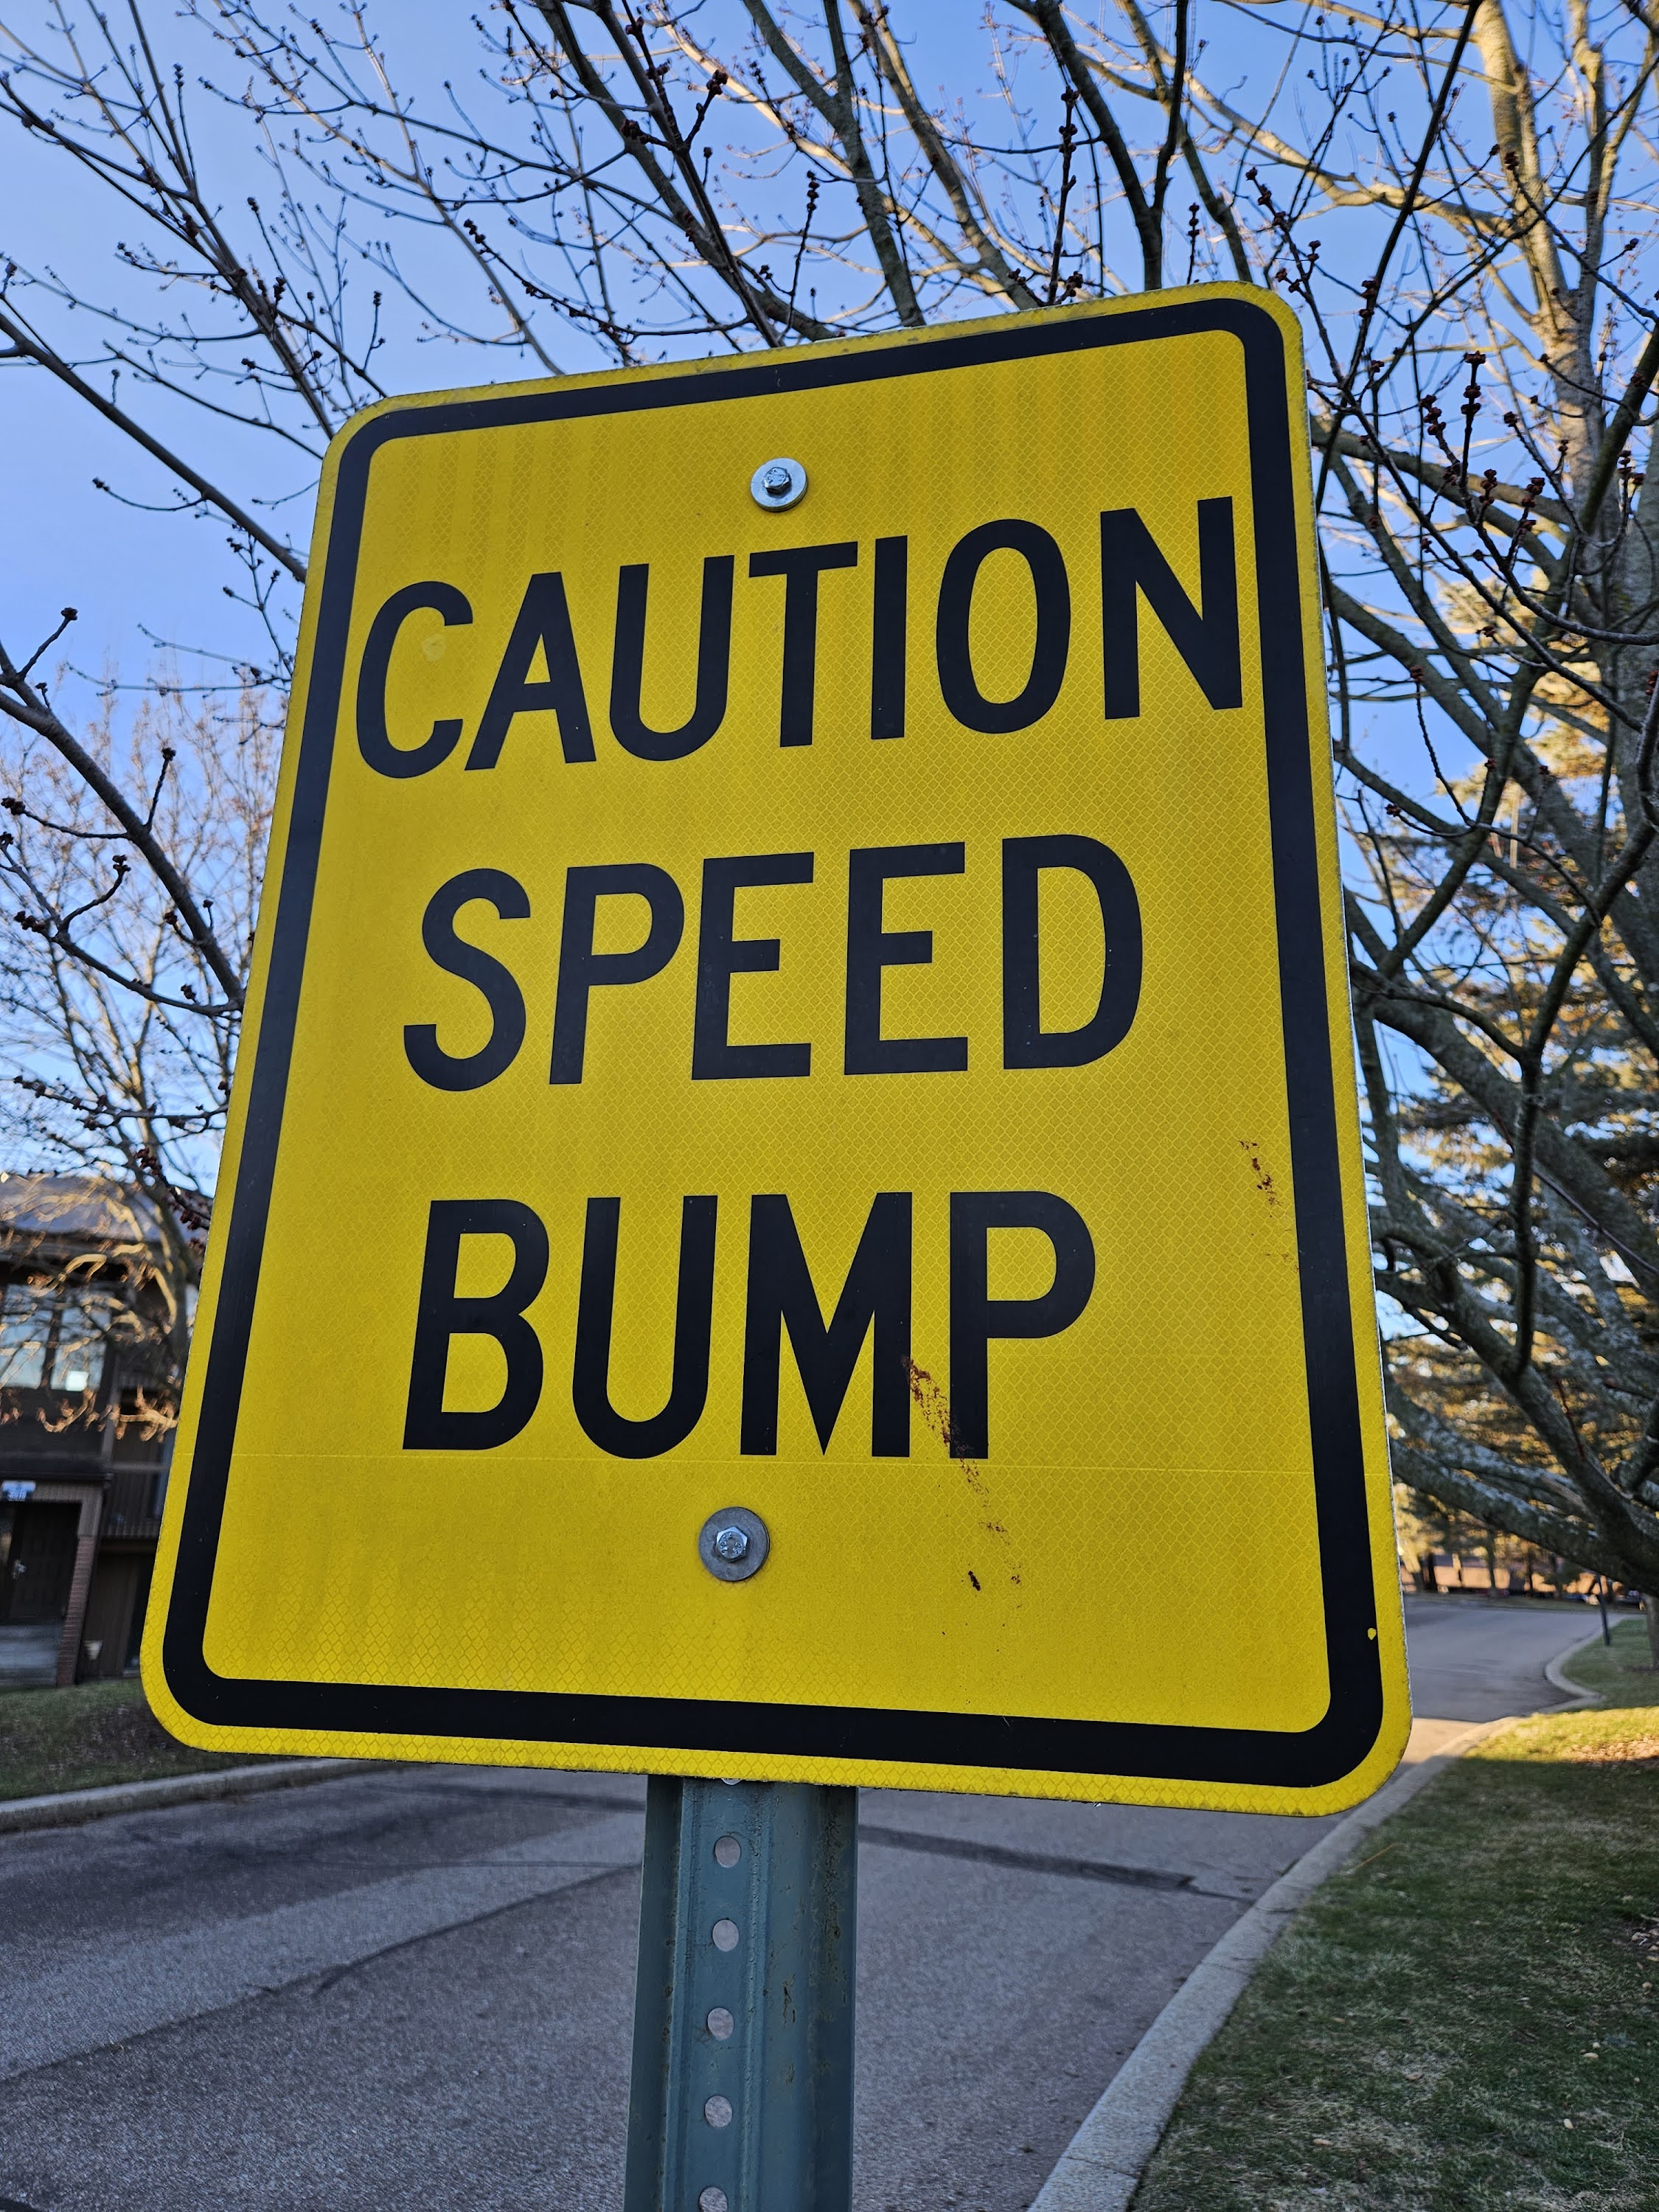 Samsung Galaxy S23 Plus photo of a "Caution Speed Bump" yellow sign.